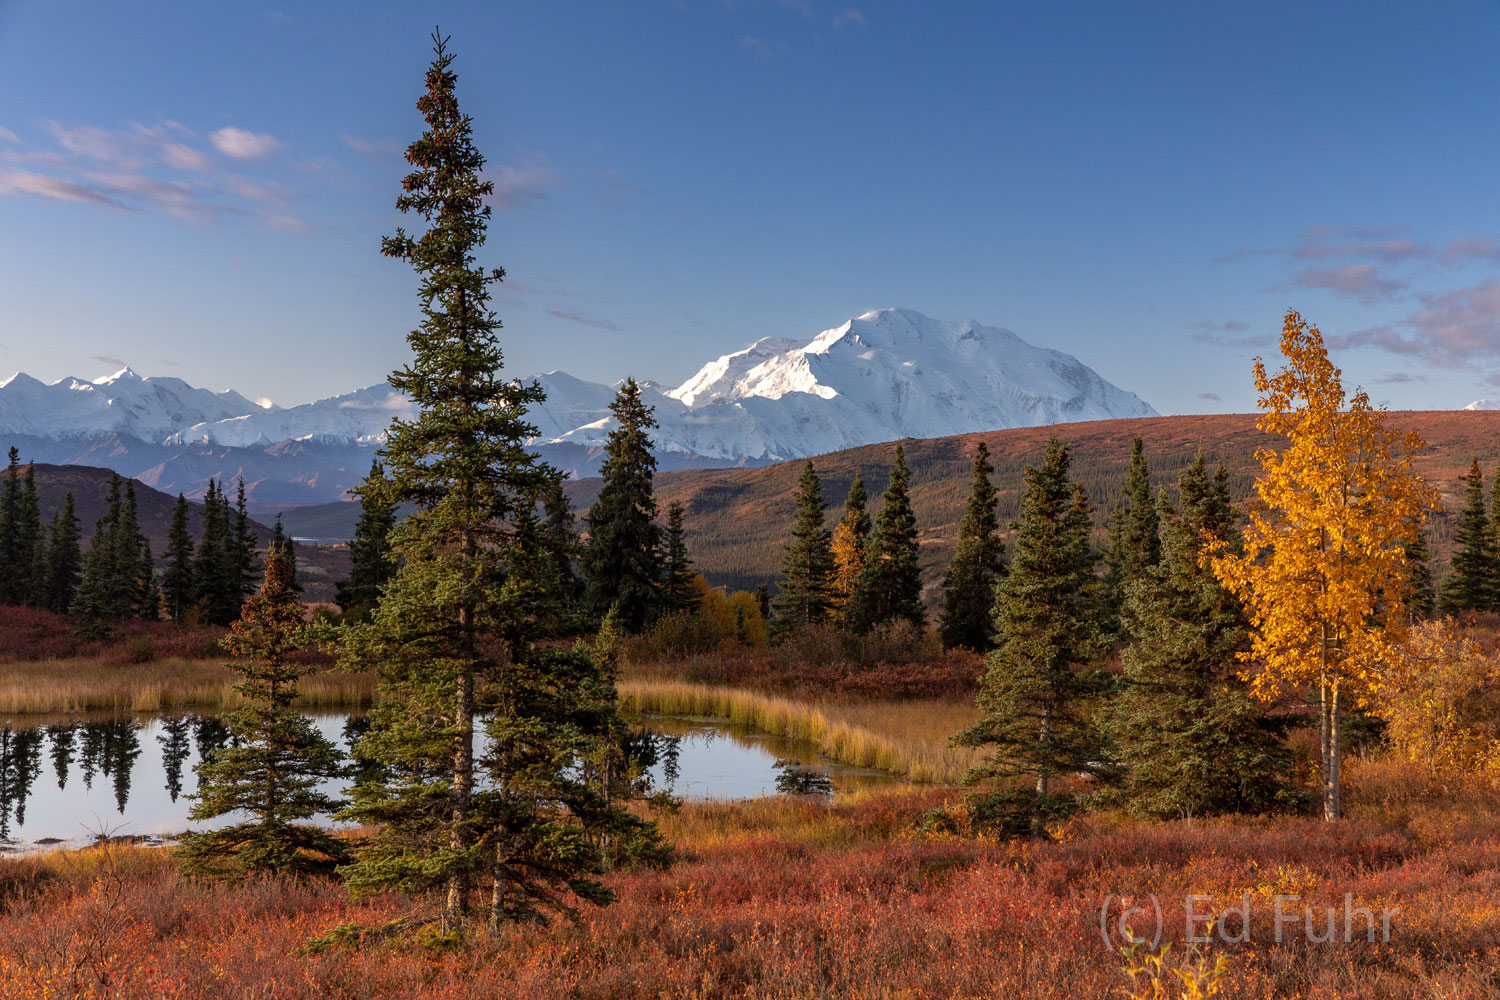 Golden leaves, red berry bushes, blue skies and a clear view of Denali greet me at sunrise by Camp Denali.